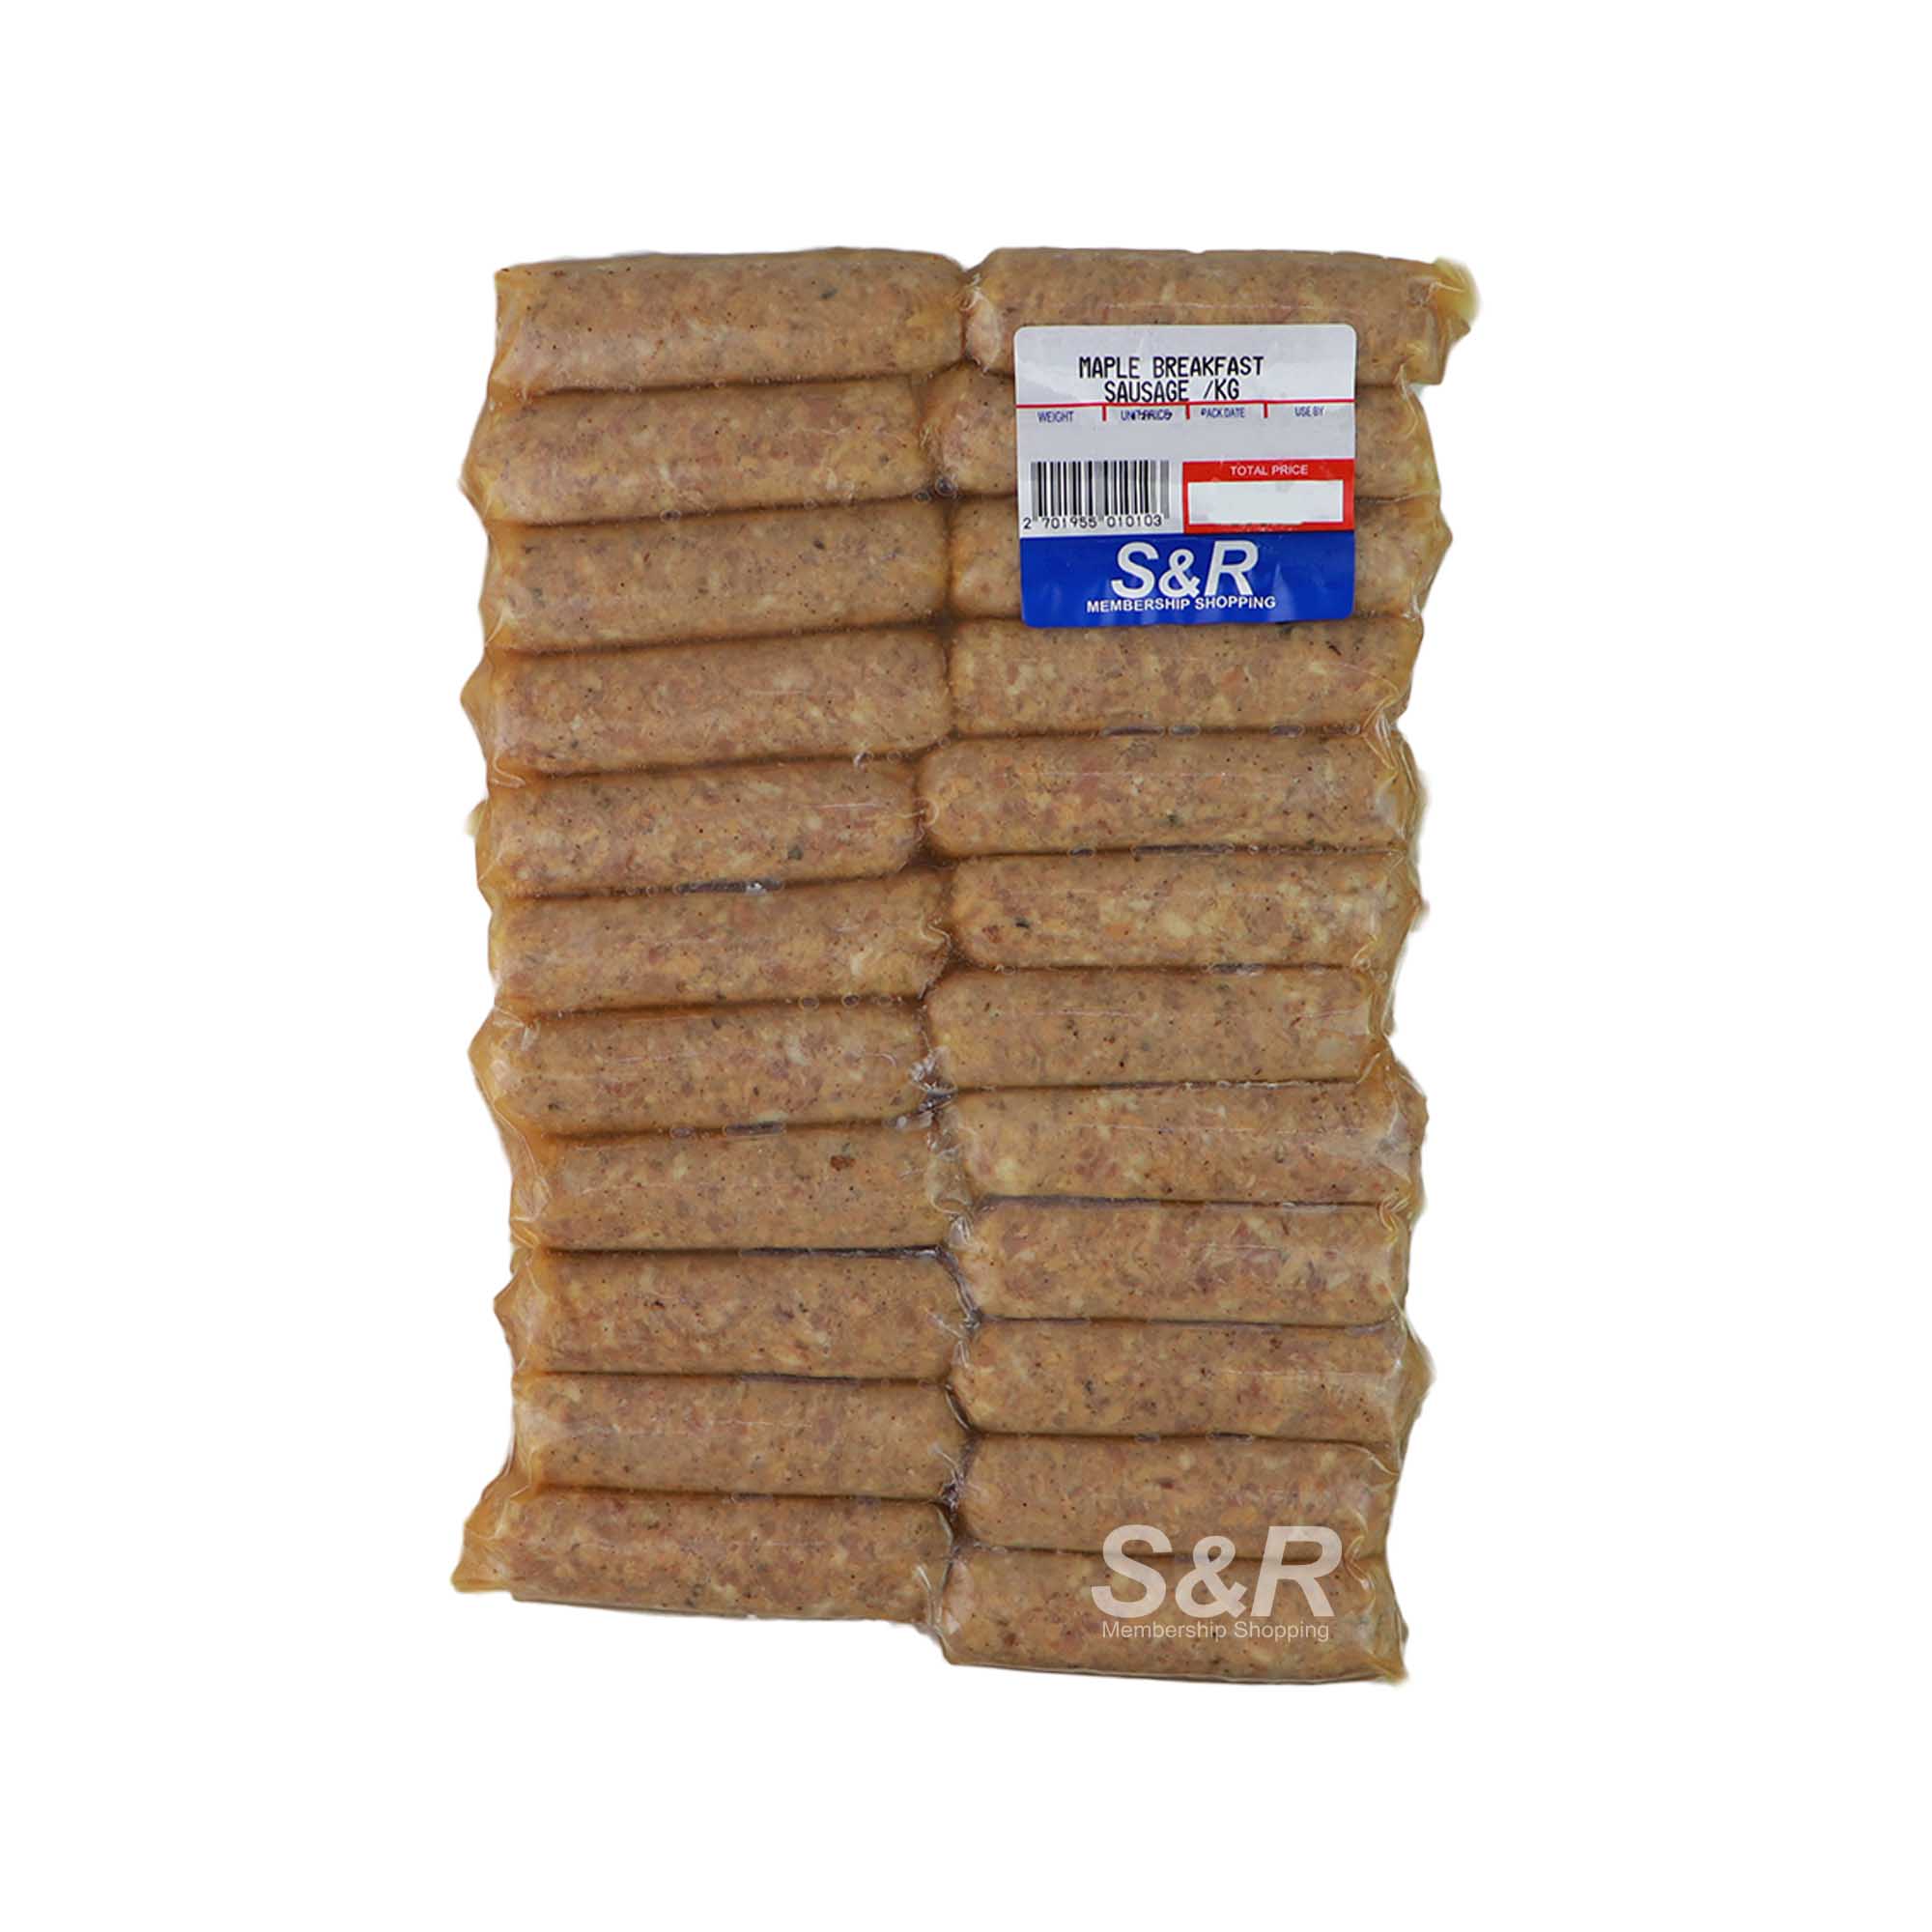 S&R Maple Breakfast Sausage approx. 1kg